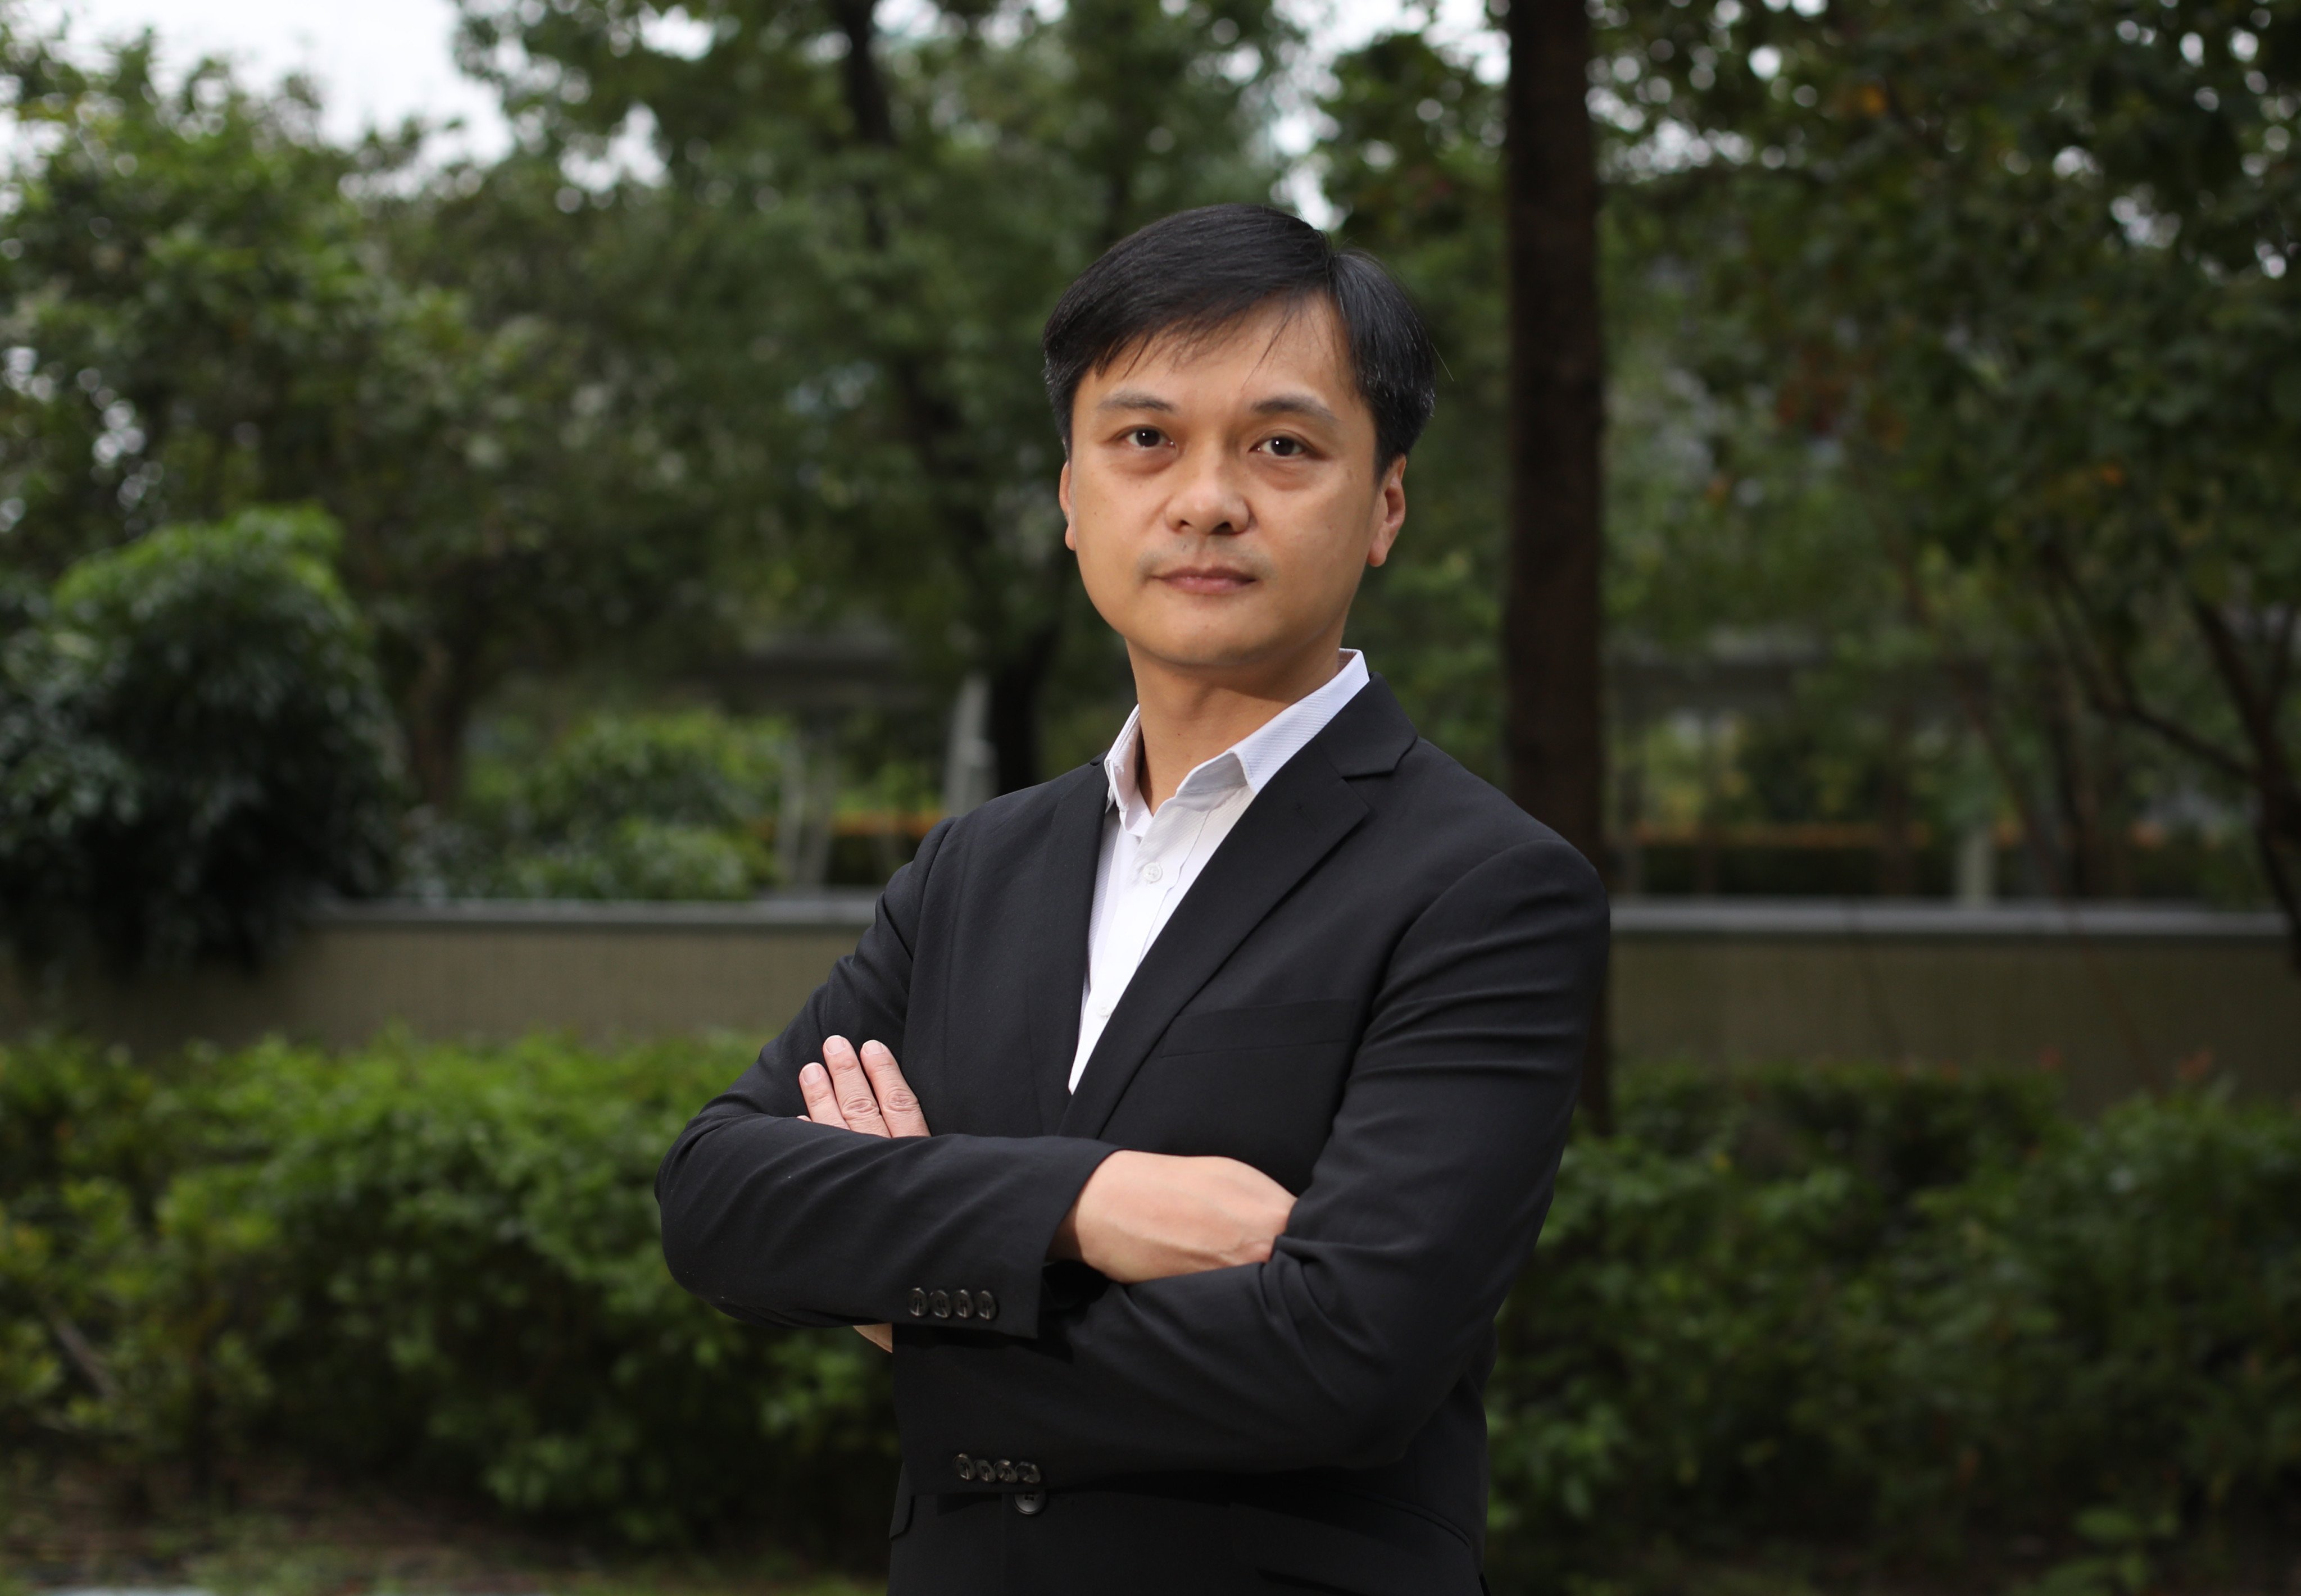 If you have a good idea, don’t hesitate, says GRST co-founder and CEO Justin Hung Yuen. Photo: Xiaomei Chen